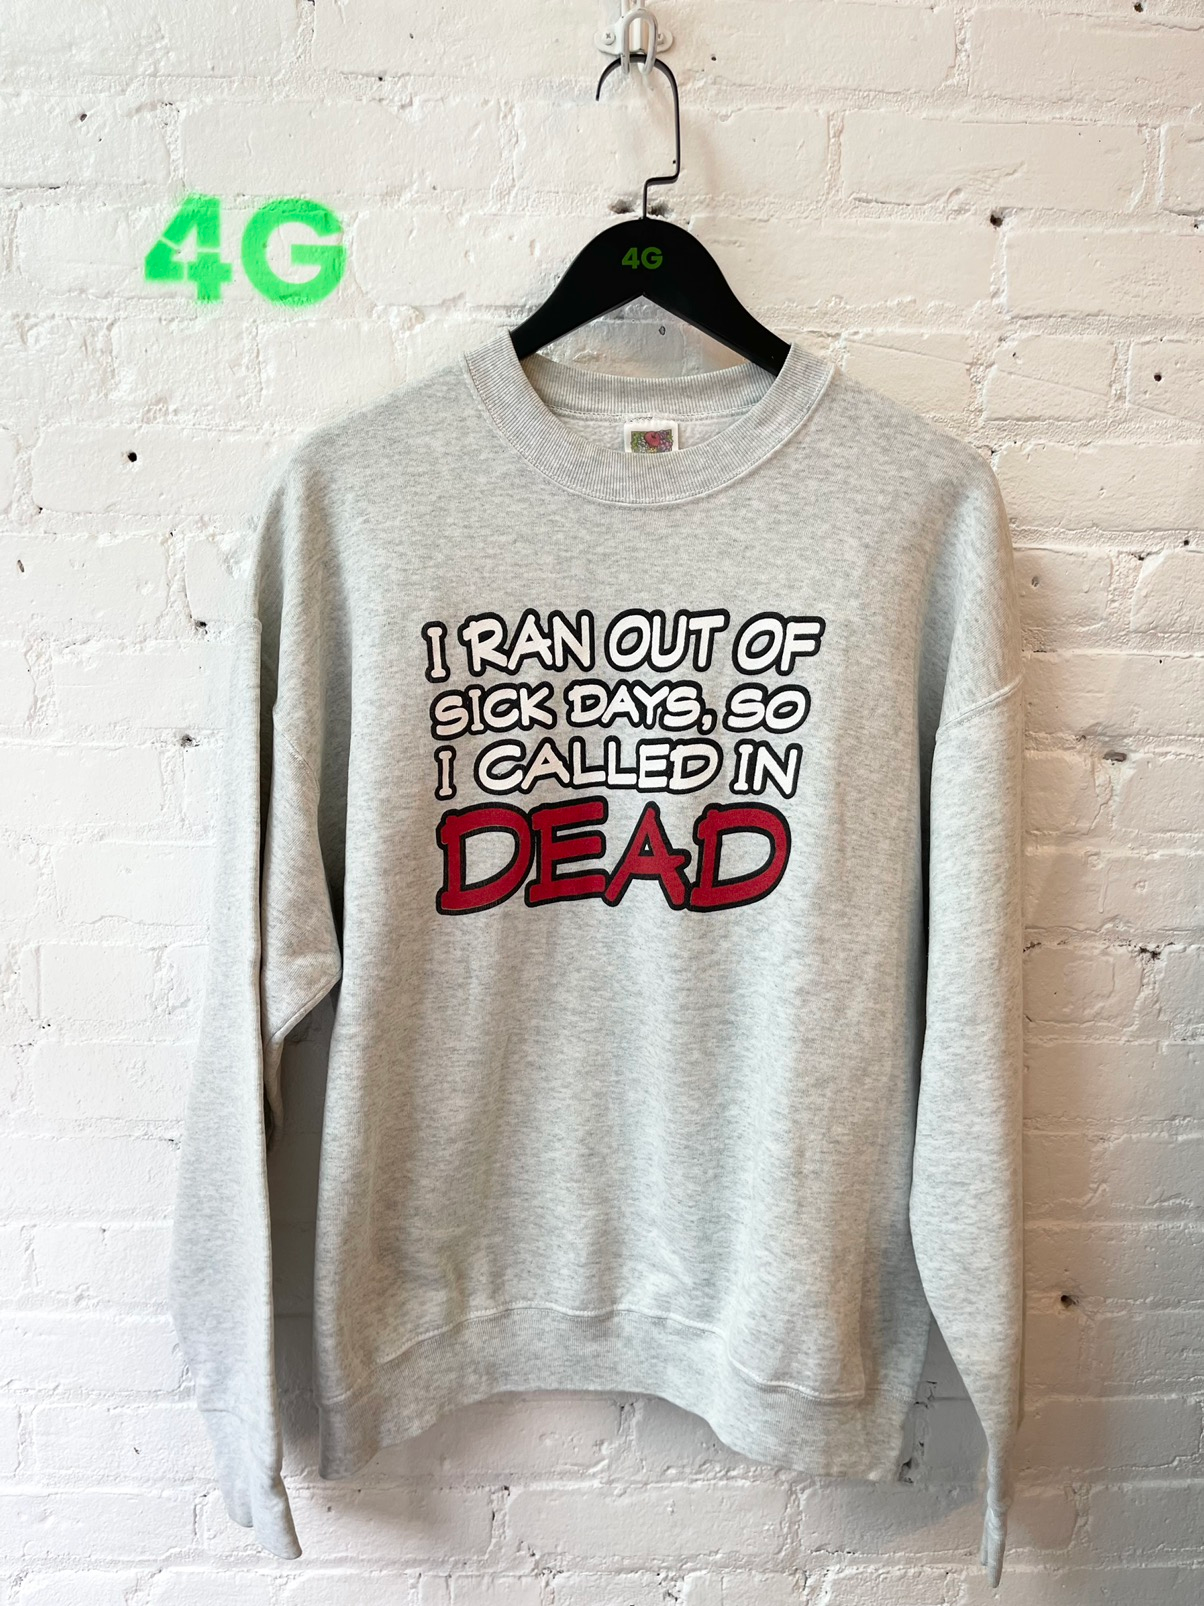 Vintage 90s CALLED OUT DEAD Sweater Jumper